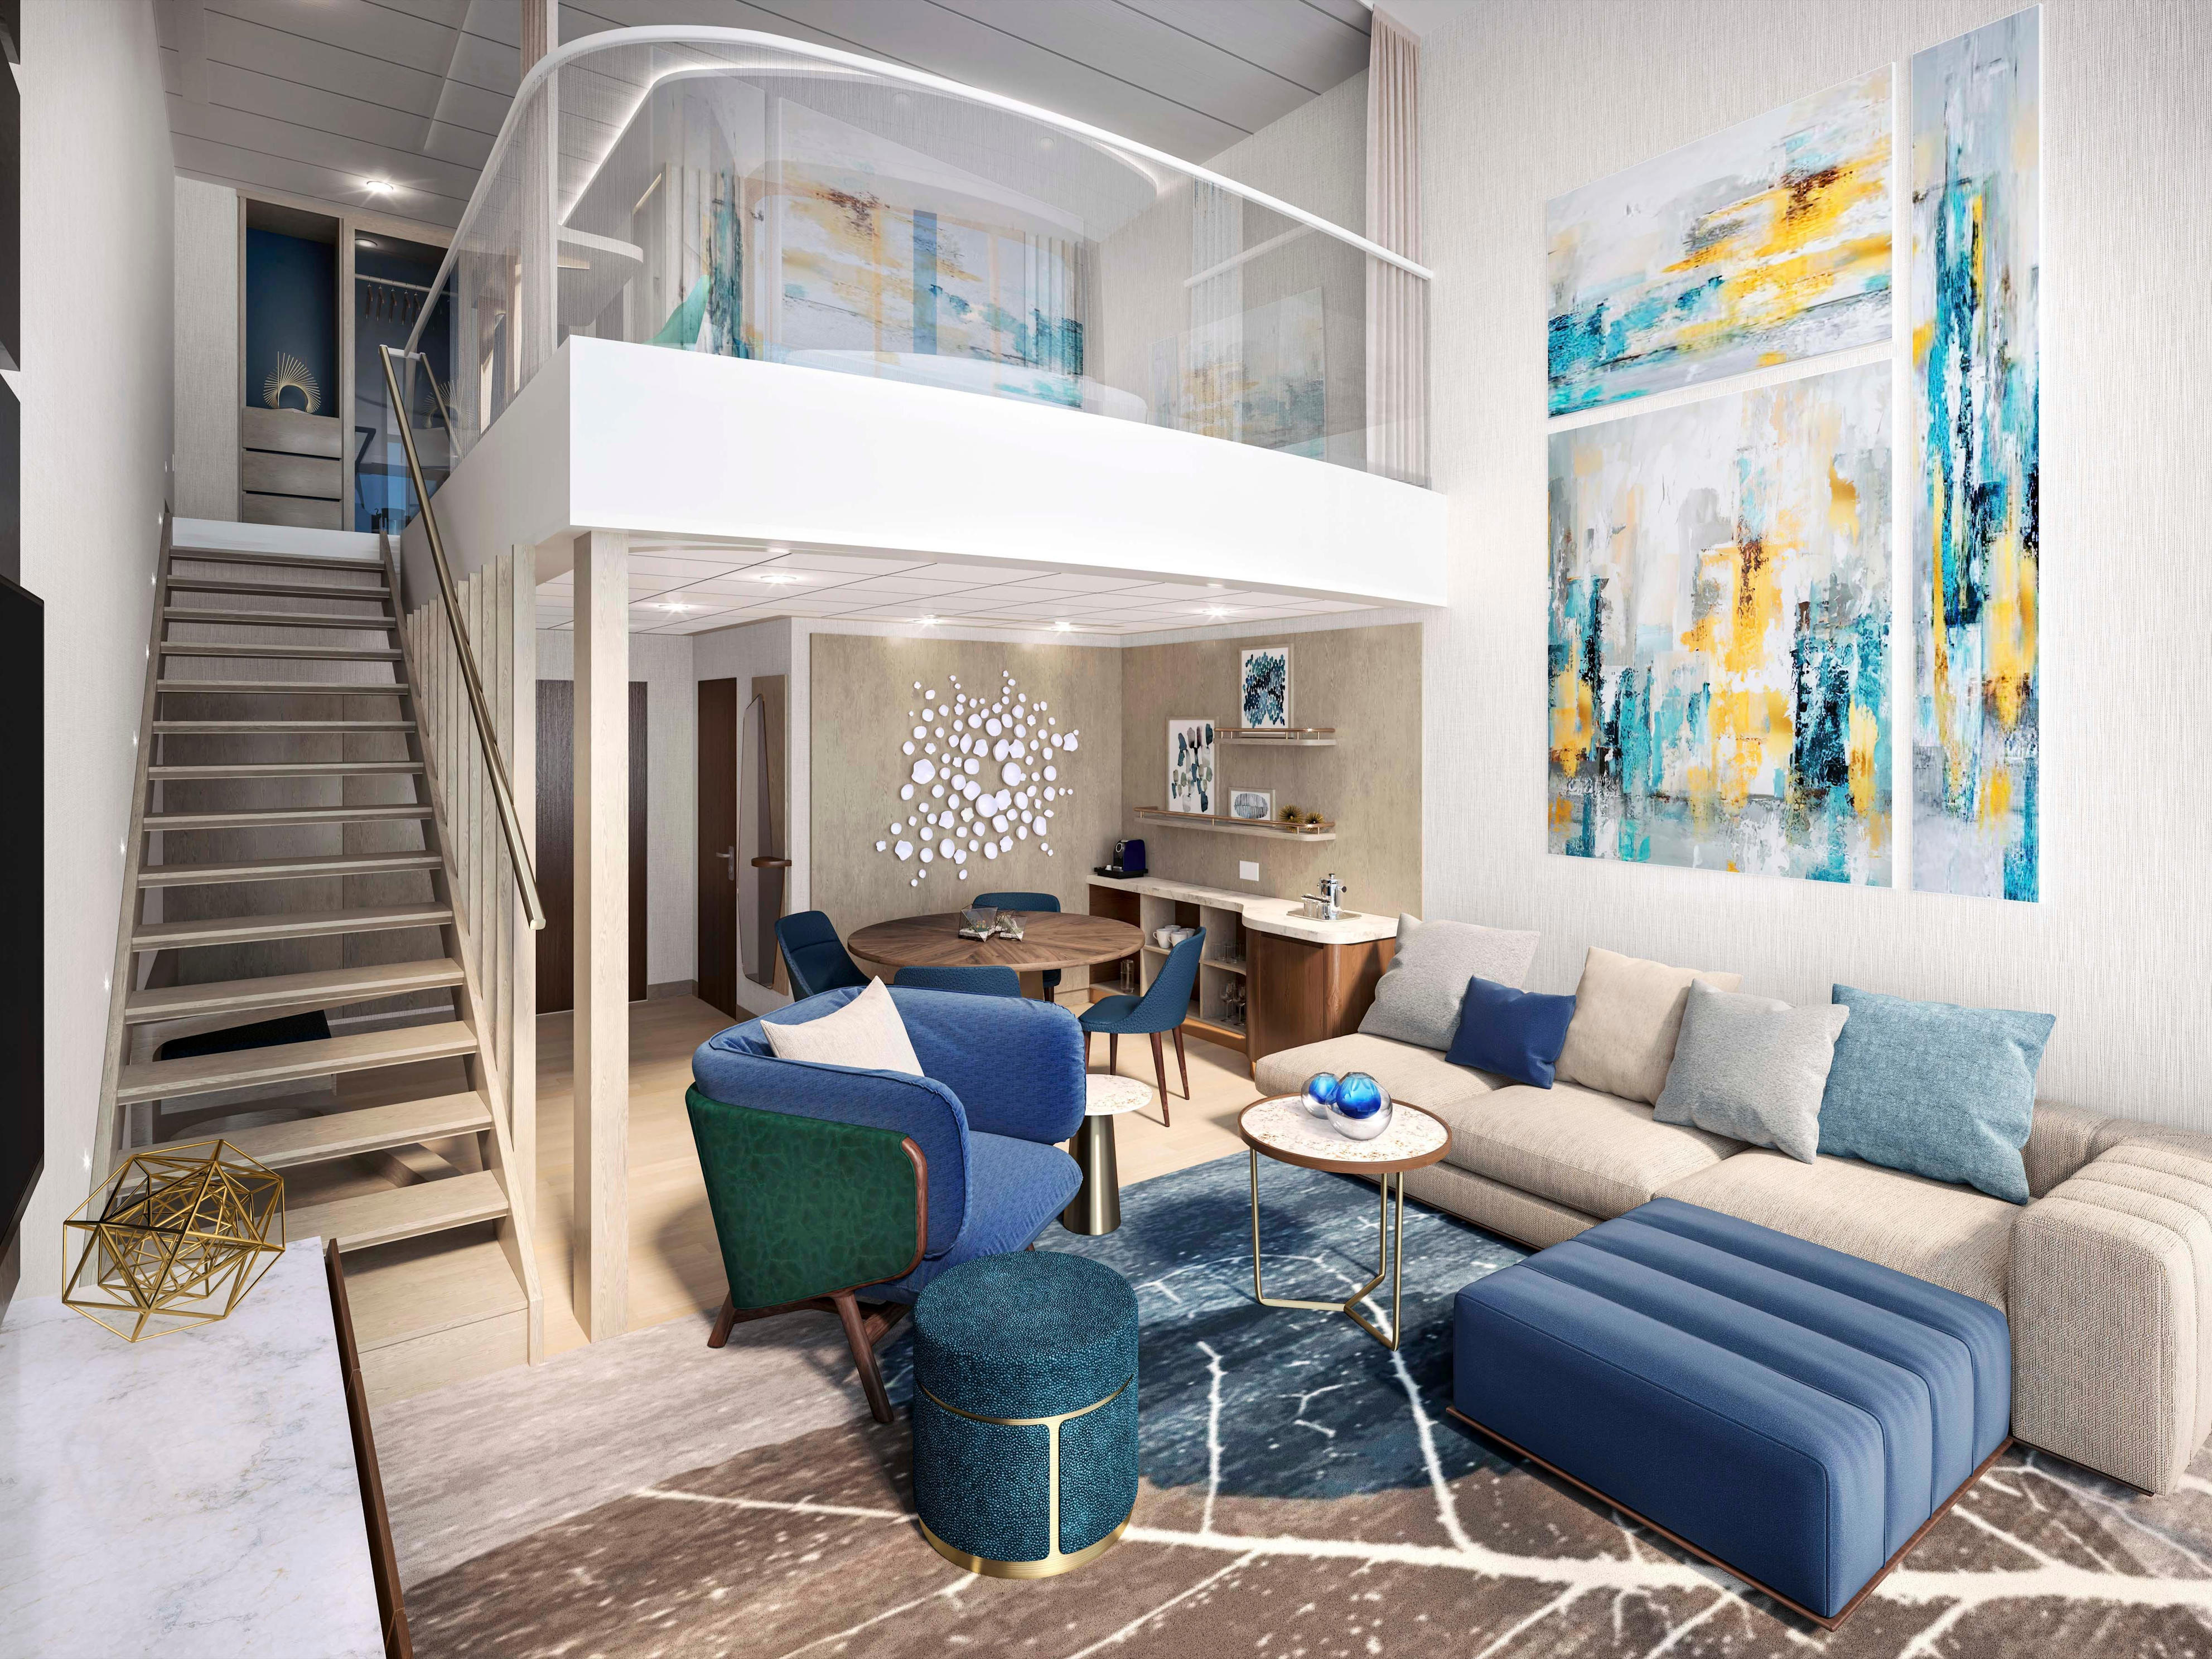 <p>Guests in the most luxurious suites also get Starlink WiFi, laundry services, the best seats for on board shows, and a "Royal Genie" to help plan their trip.</p>